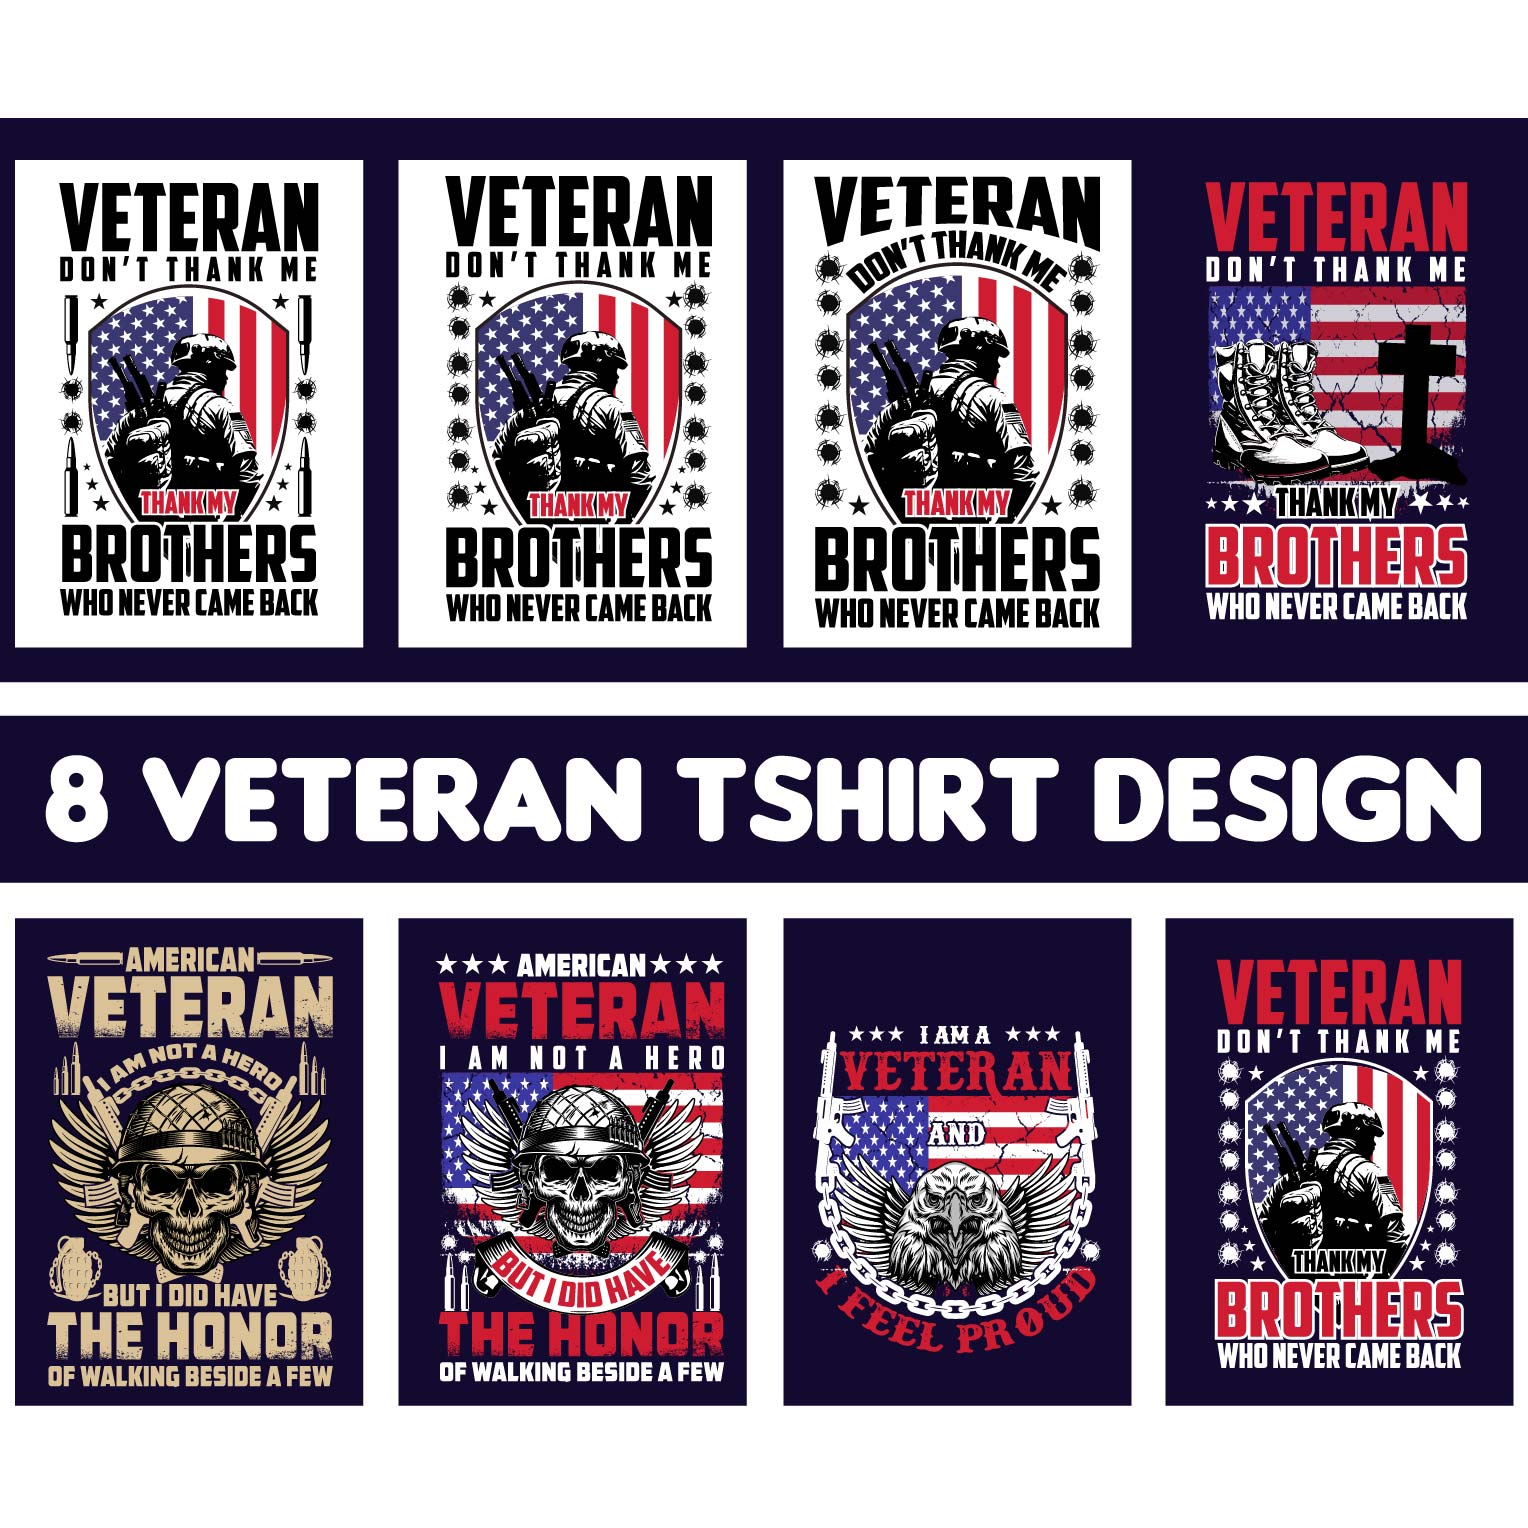 Thanks giving day and Veteran t-shirt design preview image.